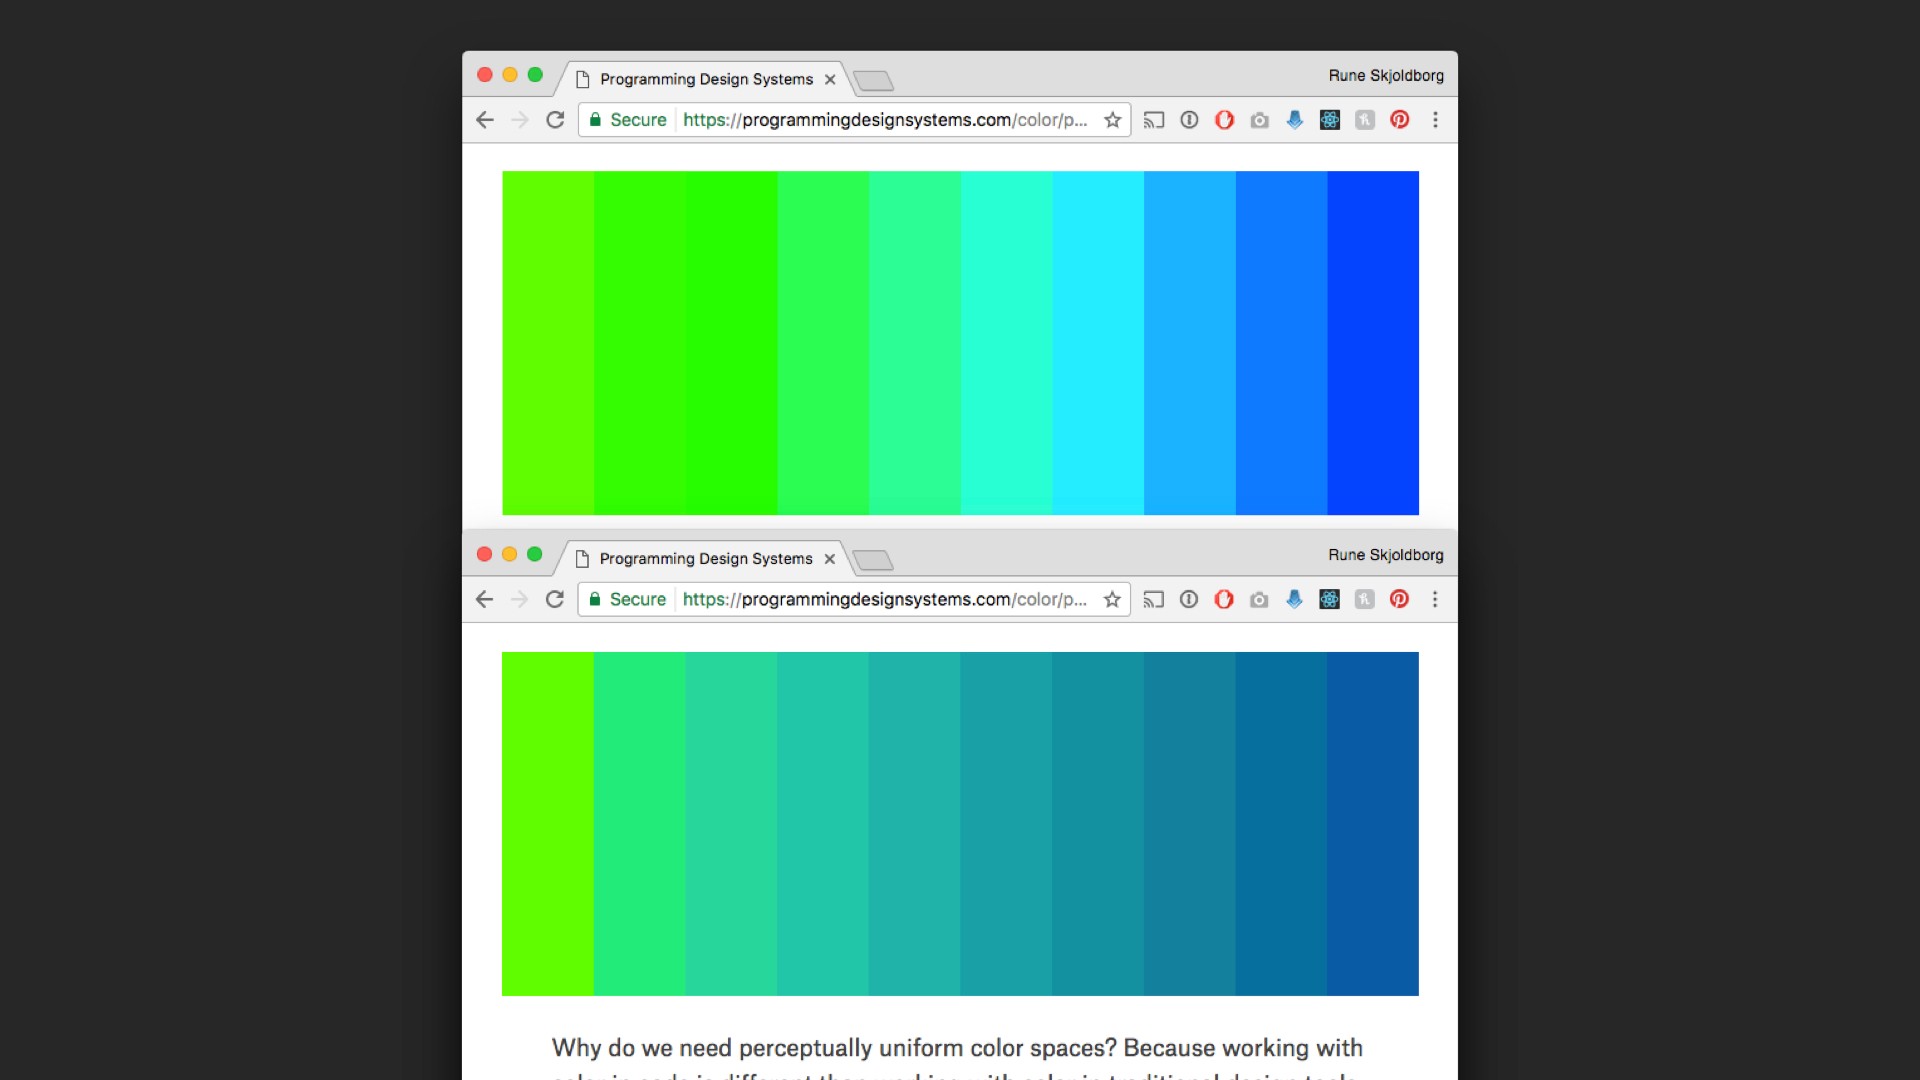 Screenshot of color changes in different spaces in referenced website.